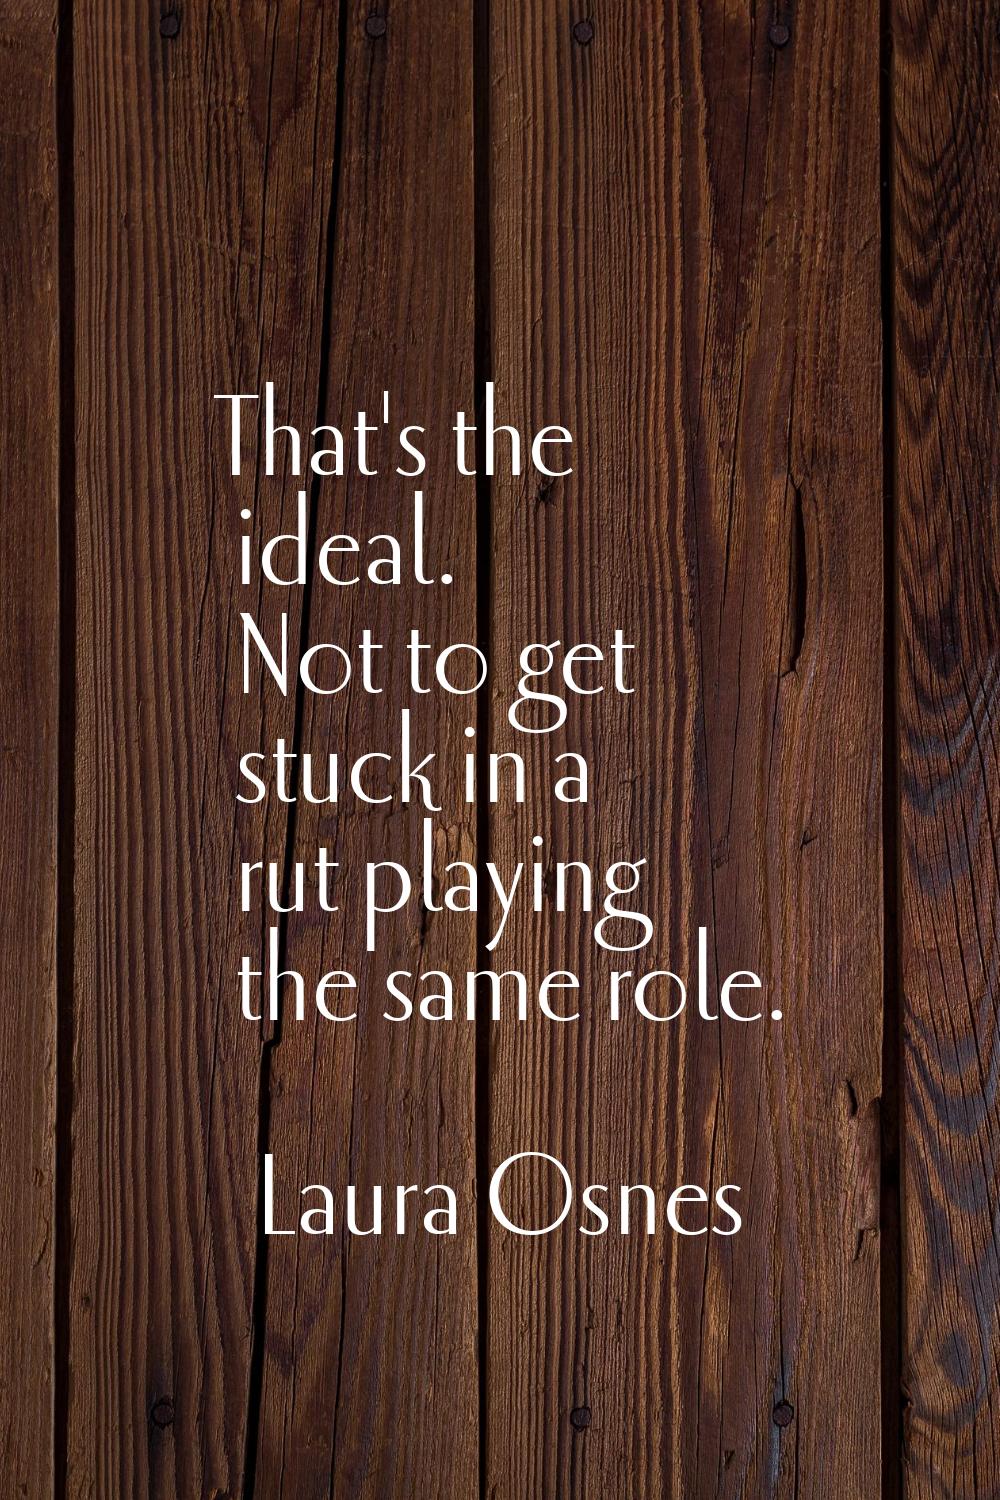 That's the ideal. Not to get stuck in a rut playing the same role.